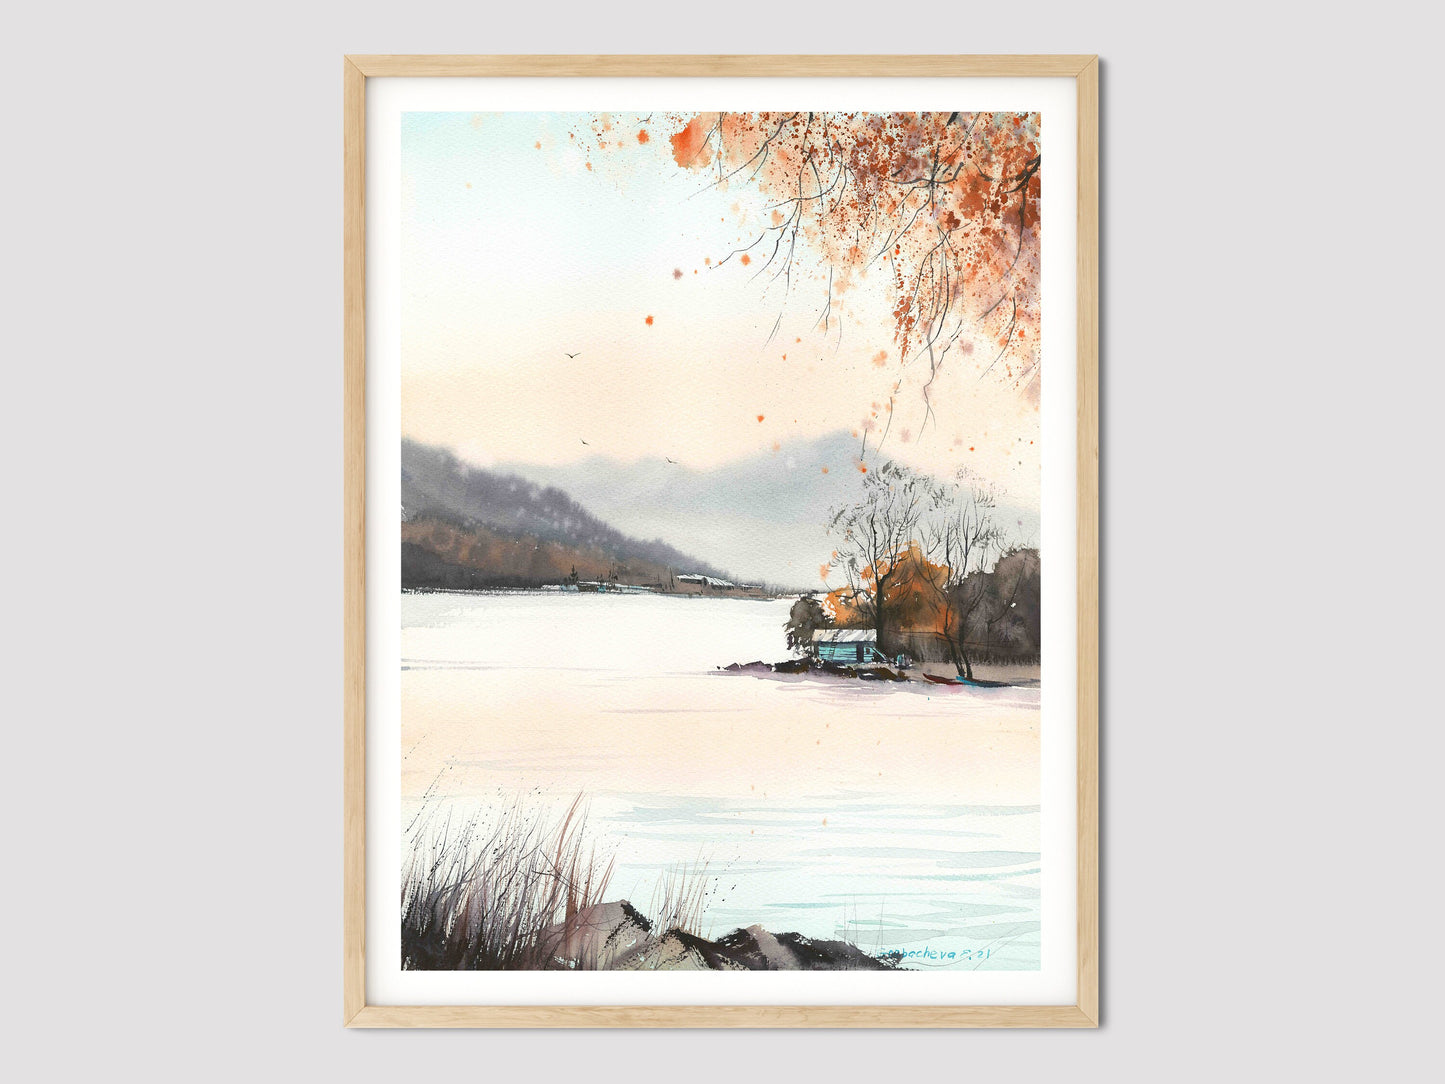 Fall Mountain Art, Nature Giclee Print, Abstract Wall Decor, Landscape Painting on Canvas, Fine Art Print